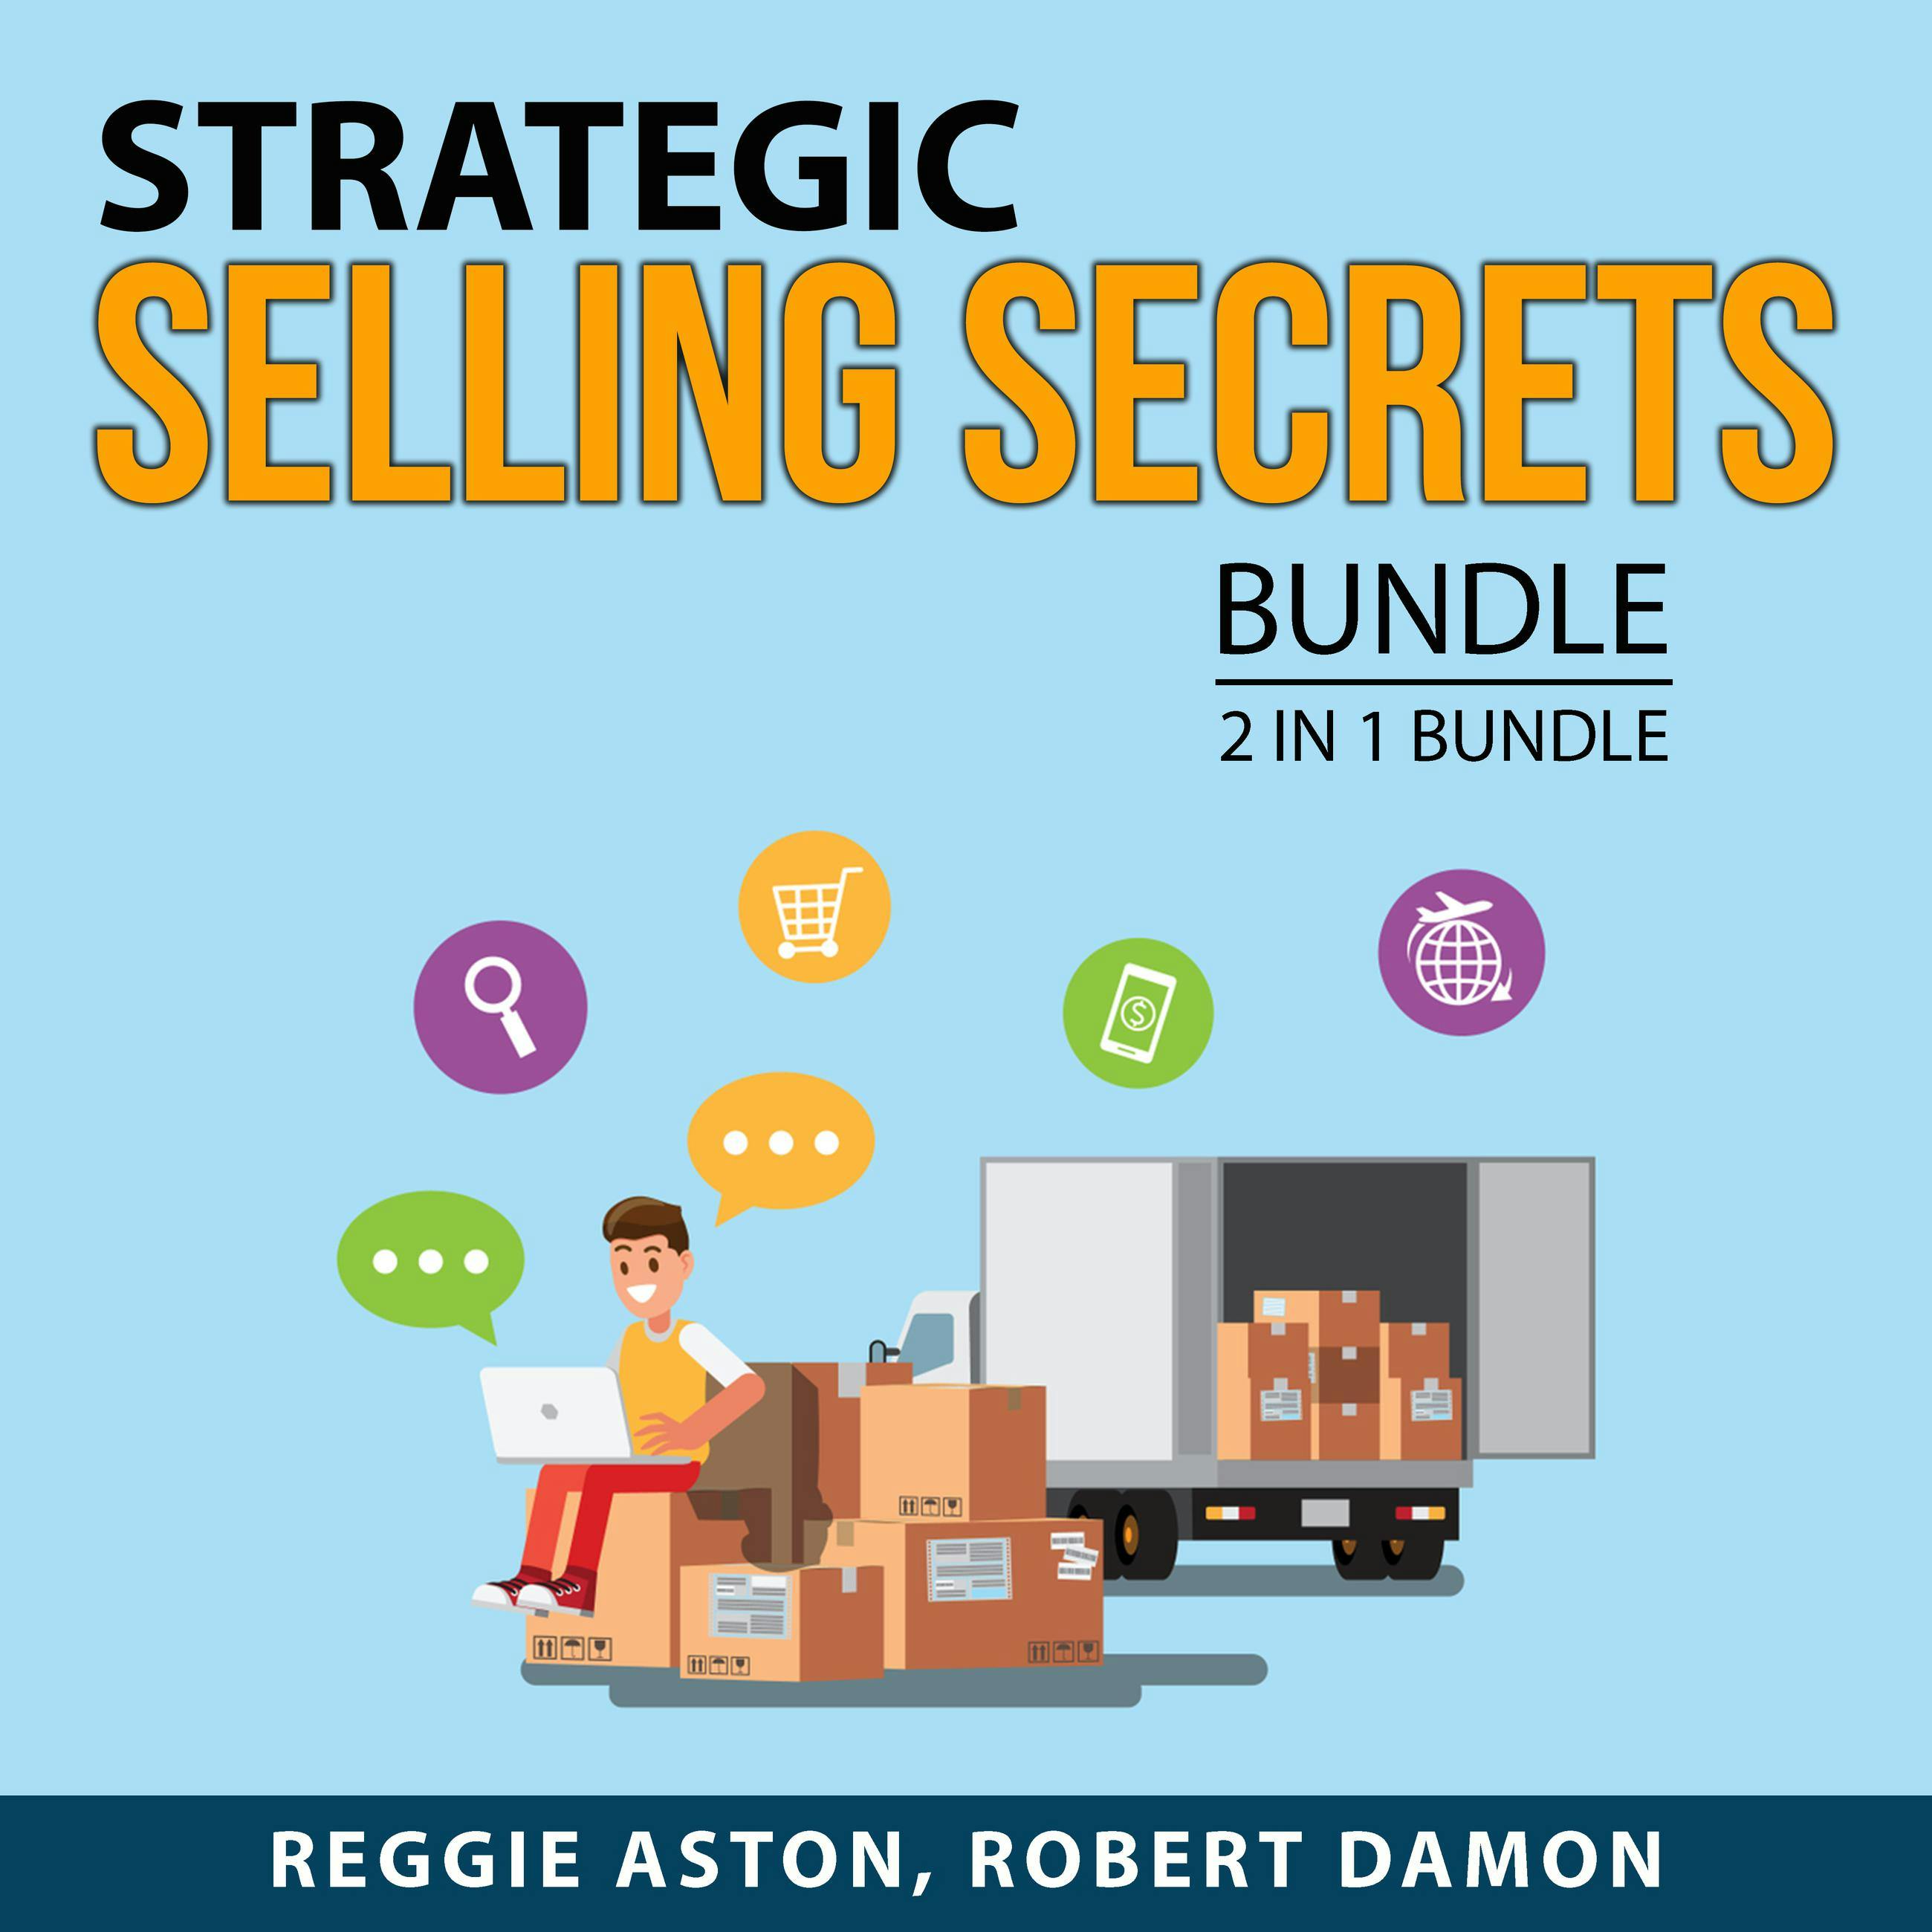 Strategic Selling Secrets Bundle, 2 in 1 Bundle: The Art of Selling and Close Every Sale - undefined